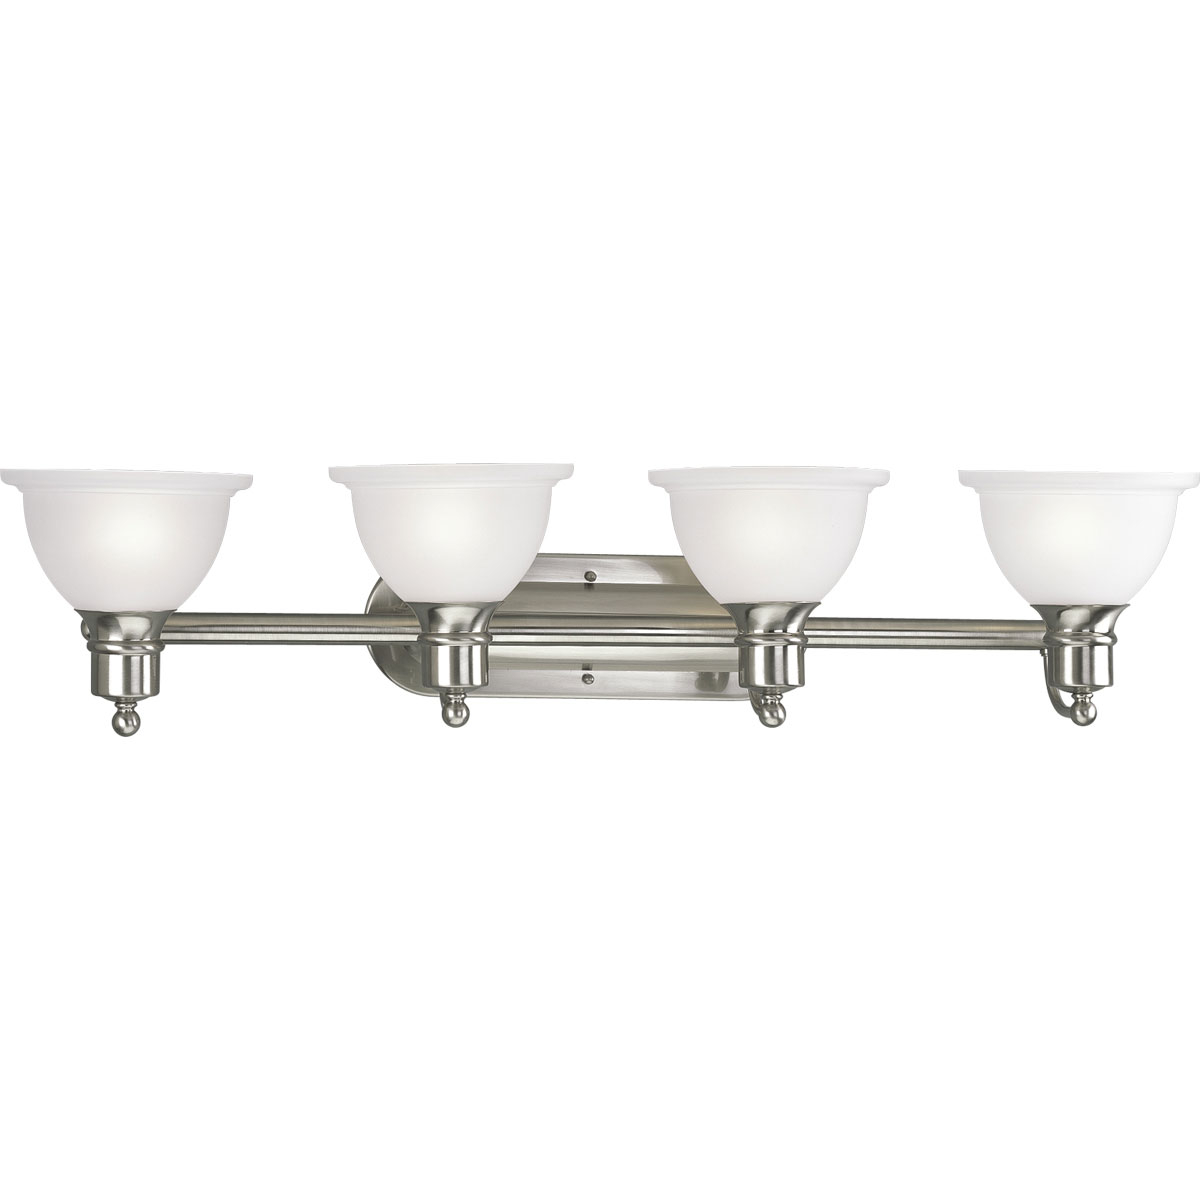 Brushed Nickel Four-light wall bracket with white etched glass. Glass in a clean, simple domed shape provides even, diffused illumination. Fixture can be installed facing upwards or downwards.